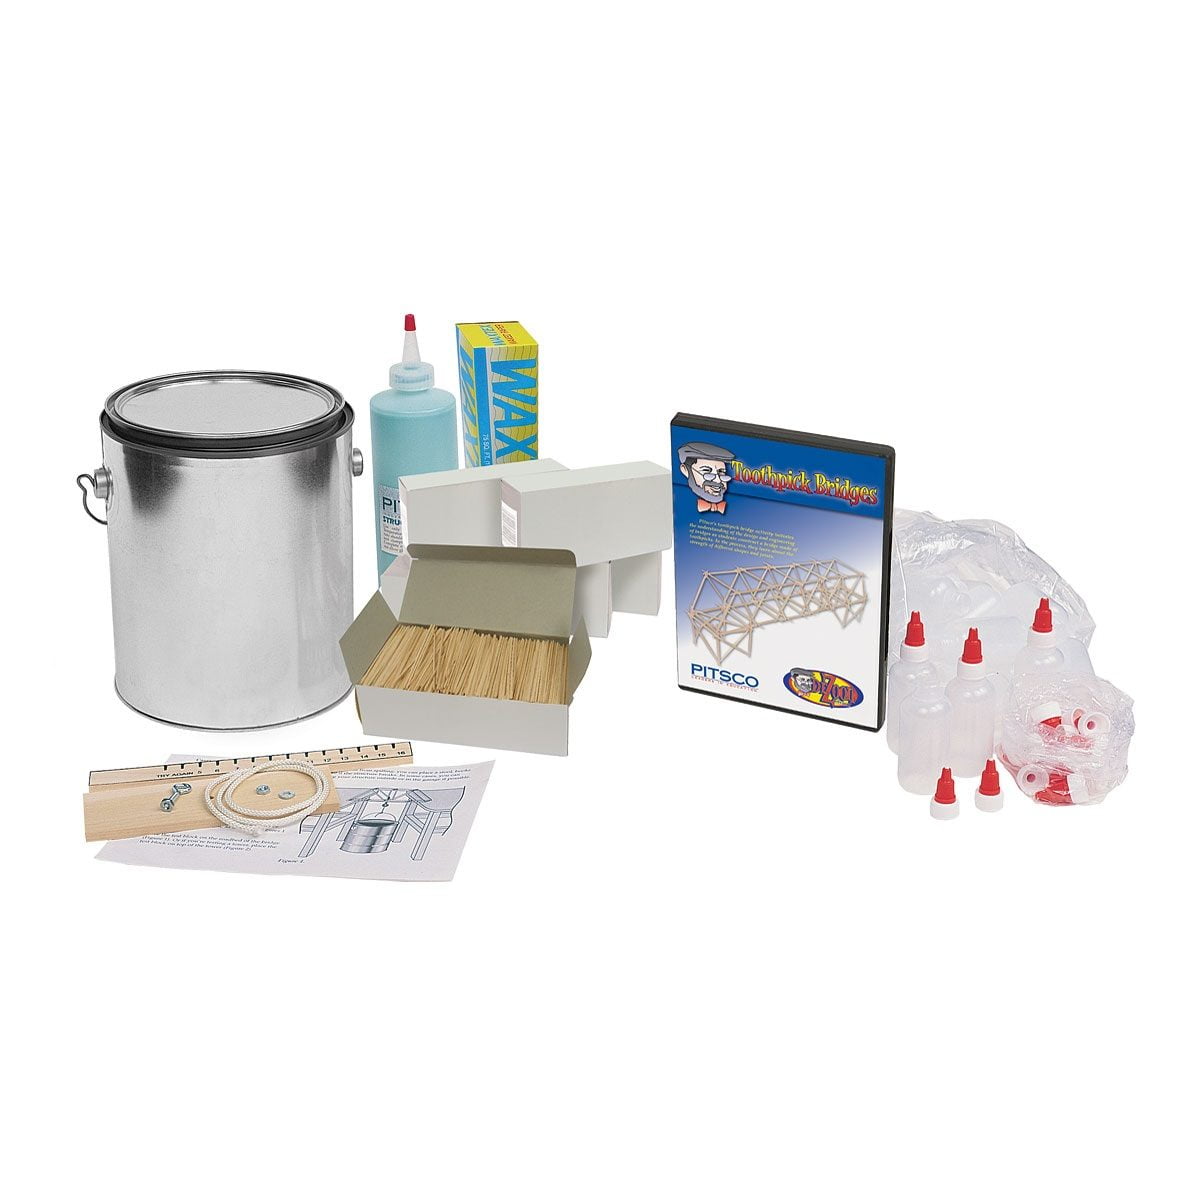 PITSCO Toothpick Bridges – Getting Started Package - why.gr